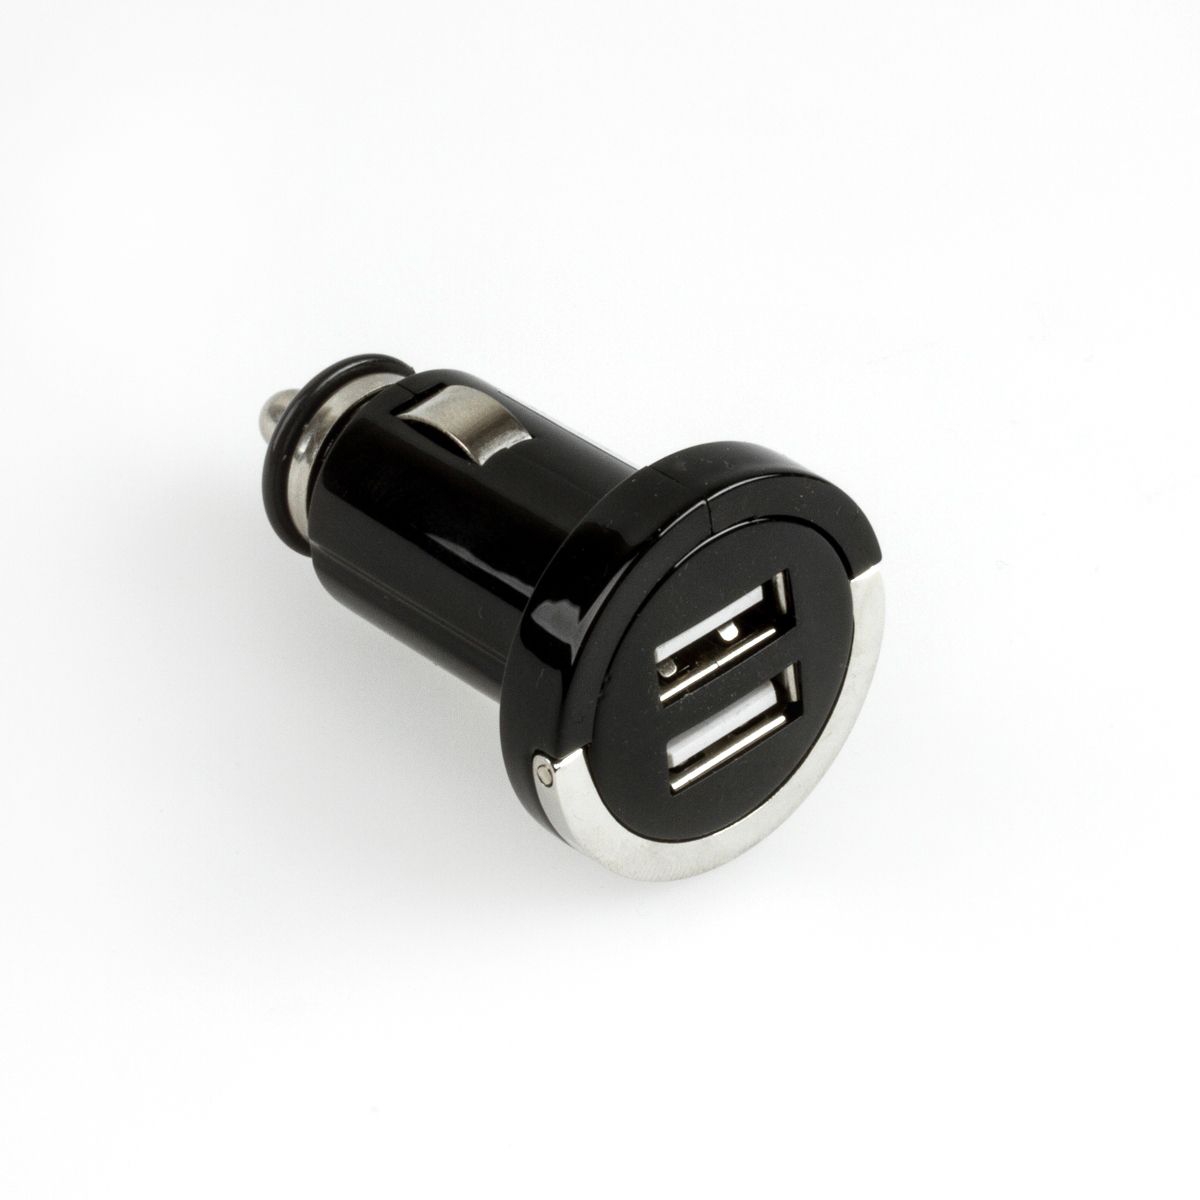 DUAL USB Car Charger IN 12-24V - 2x OUT 5V max. 2100mA